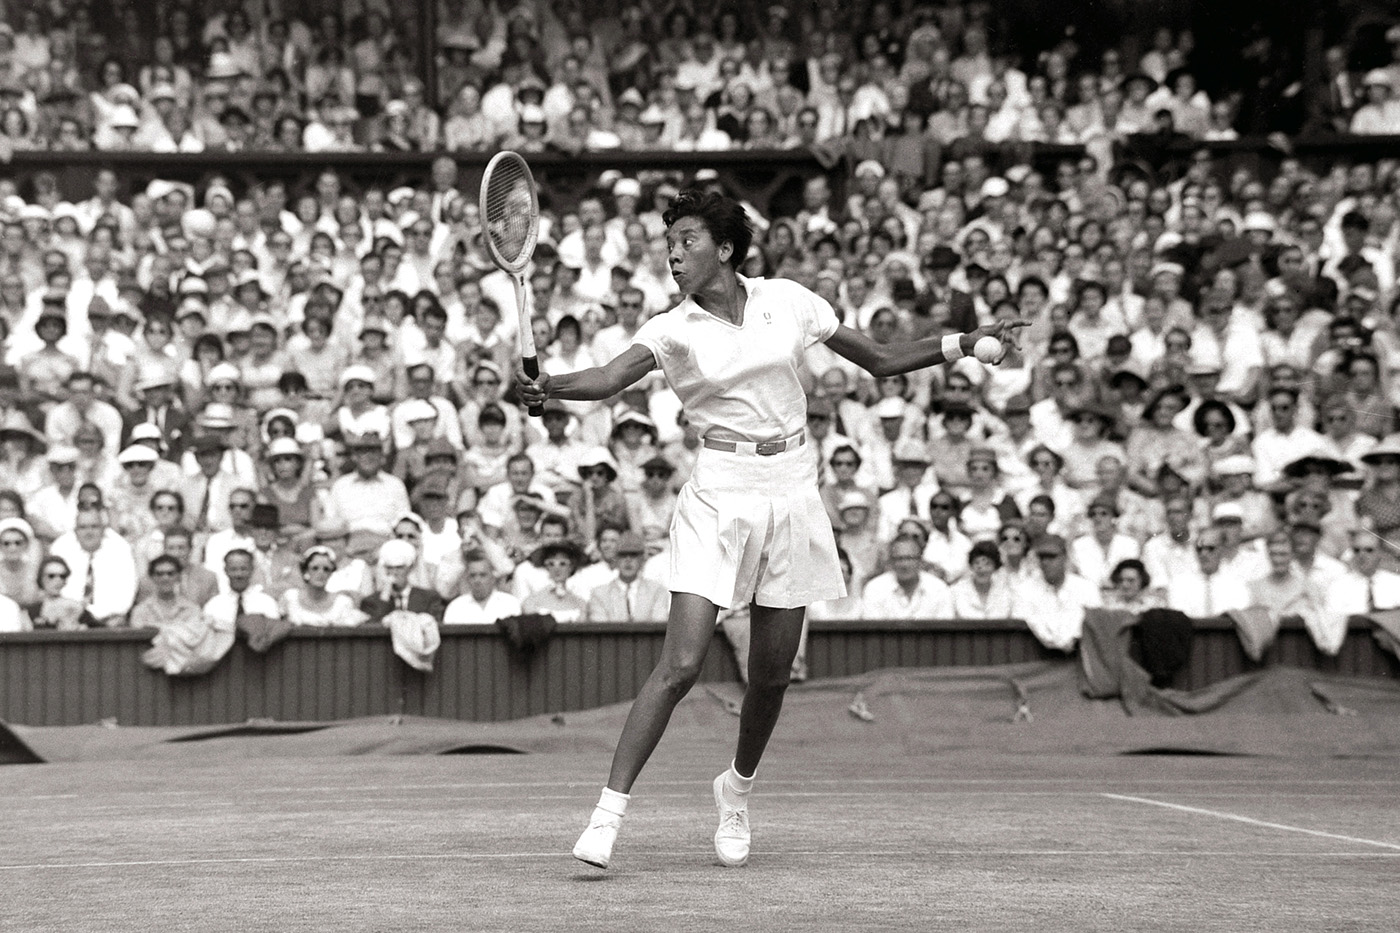 At The Height Of Her Tennis Career, Althea Gibson Turned To Golf